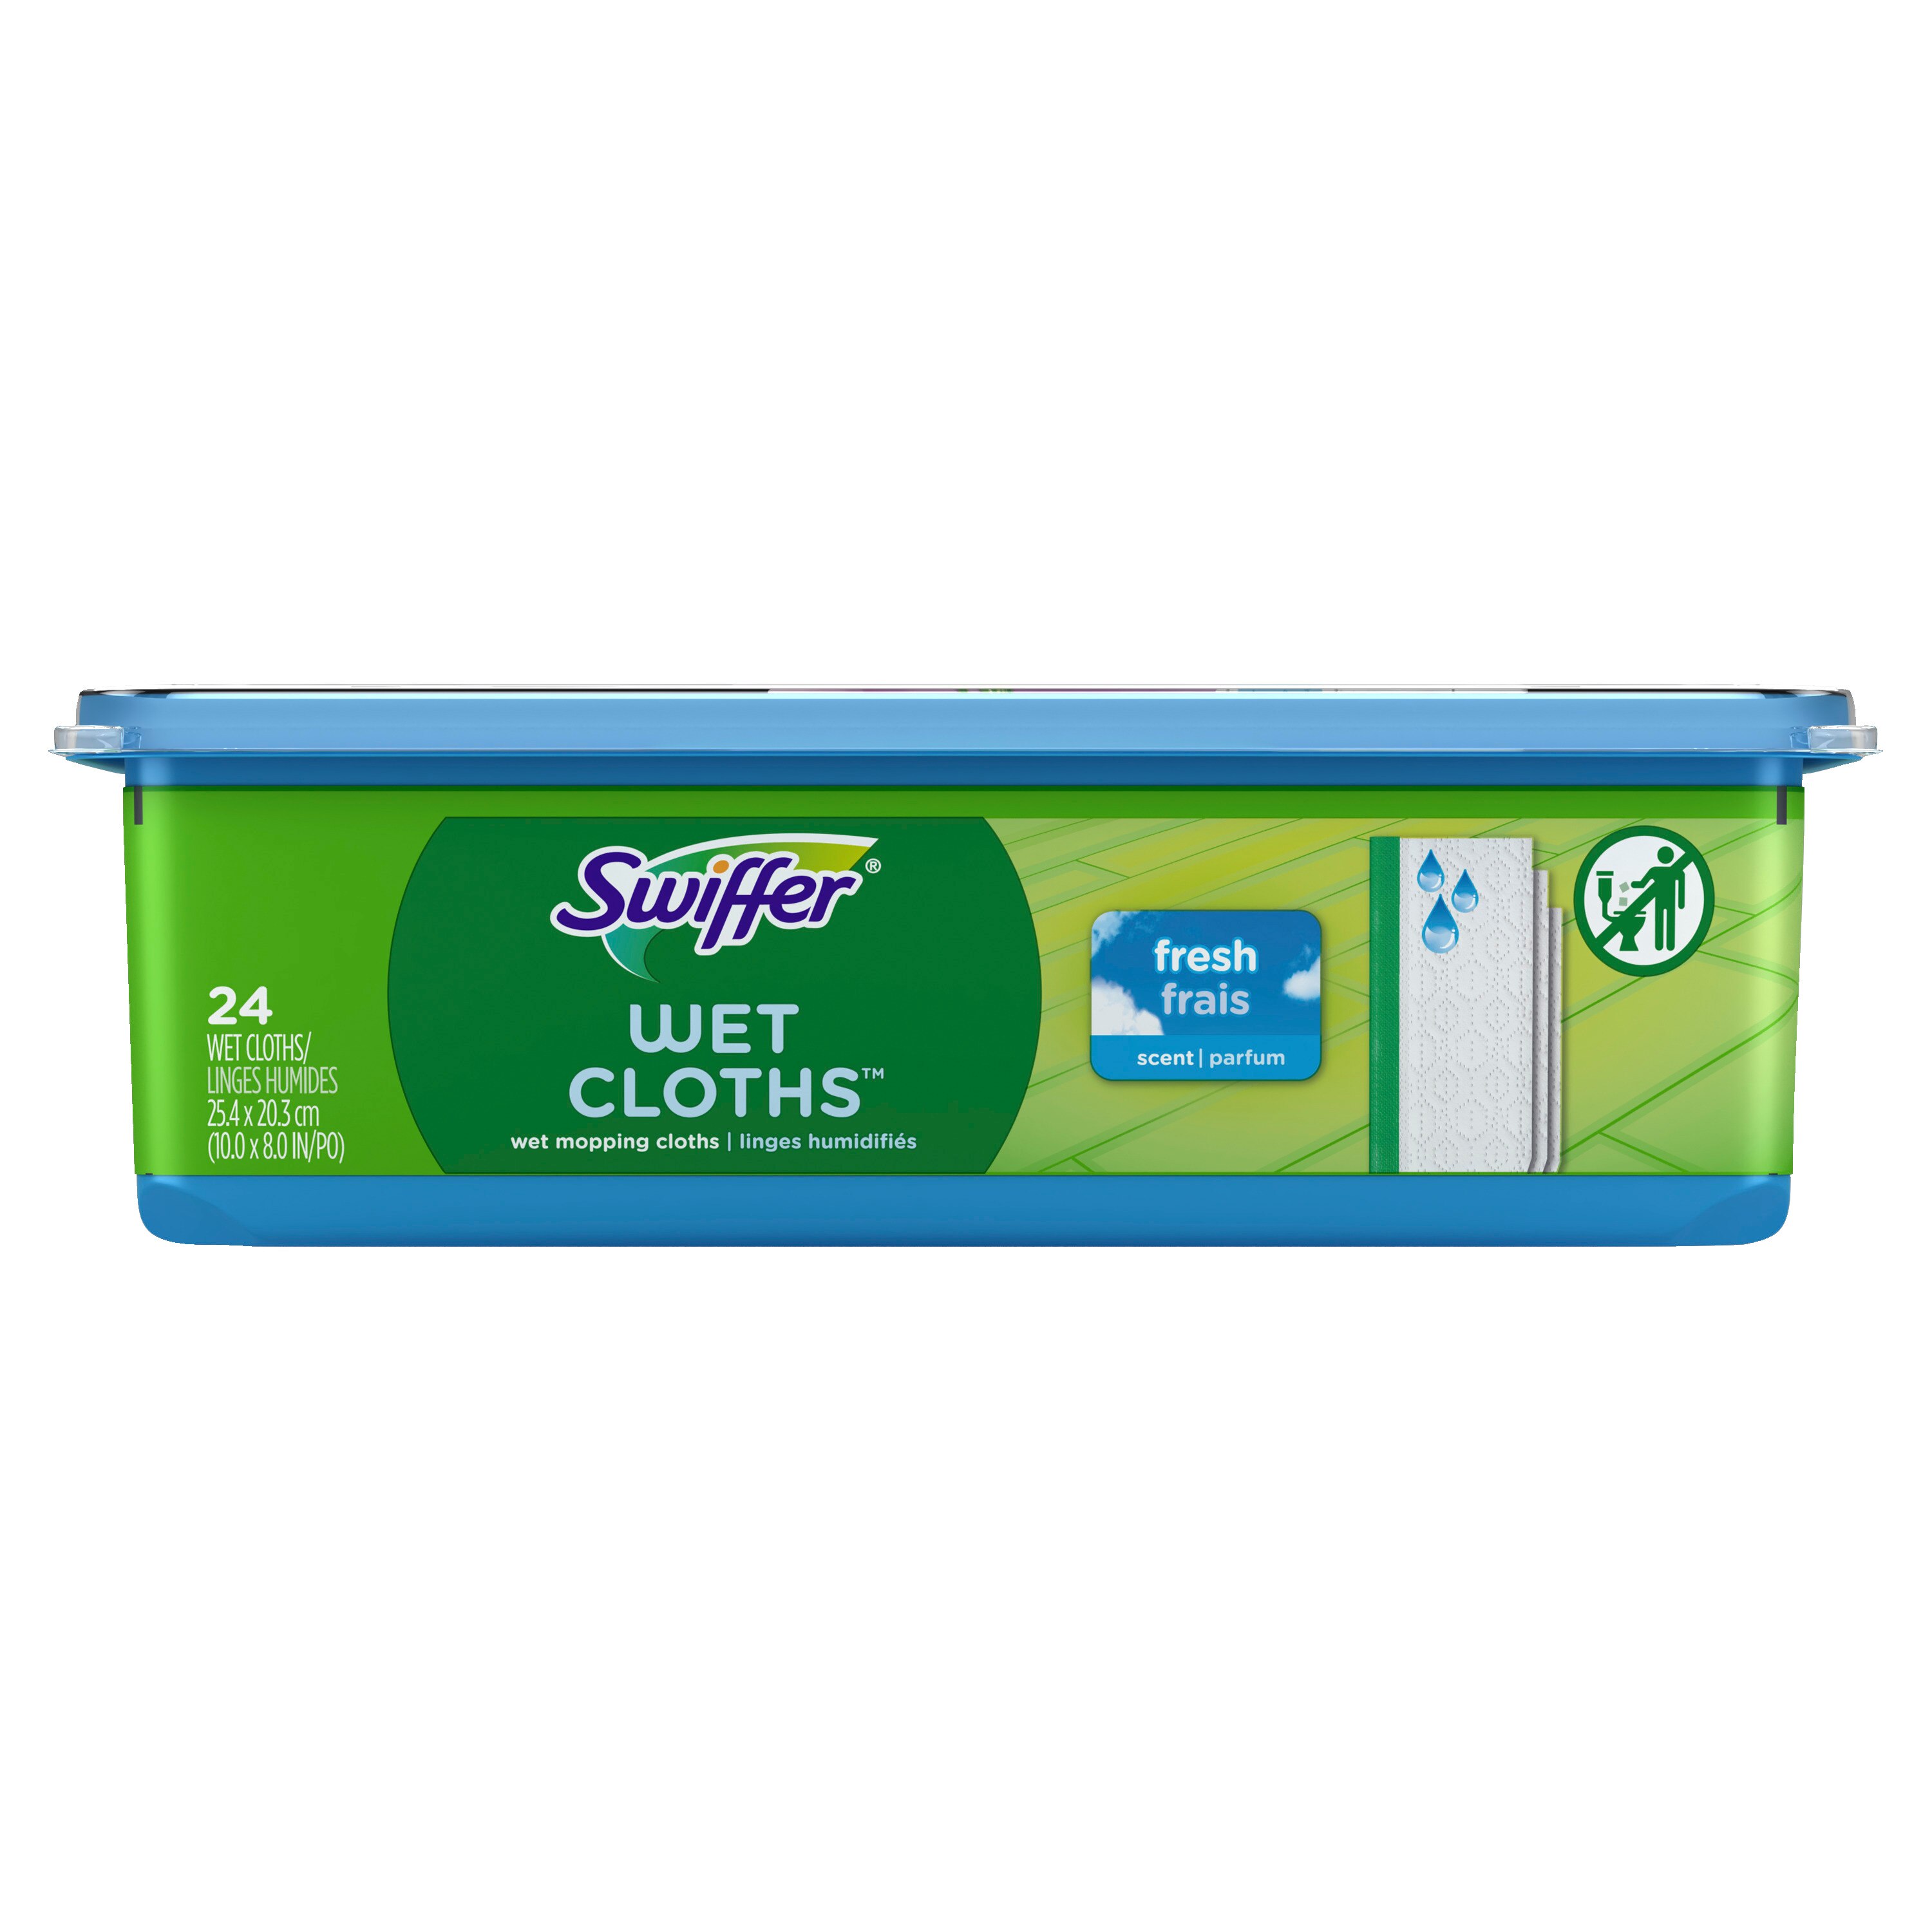 Swiffer Sweeper Wet Mopping Pad Multi Surface Refills for Floor Mop, Open, 24 Pack